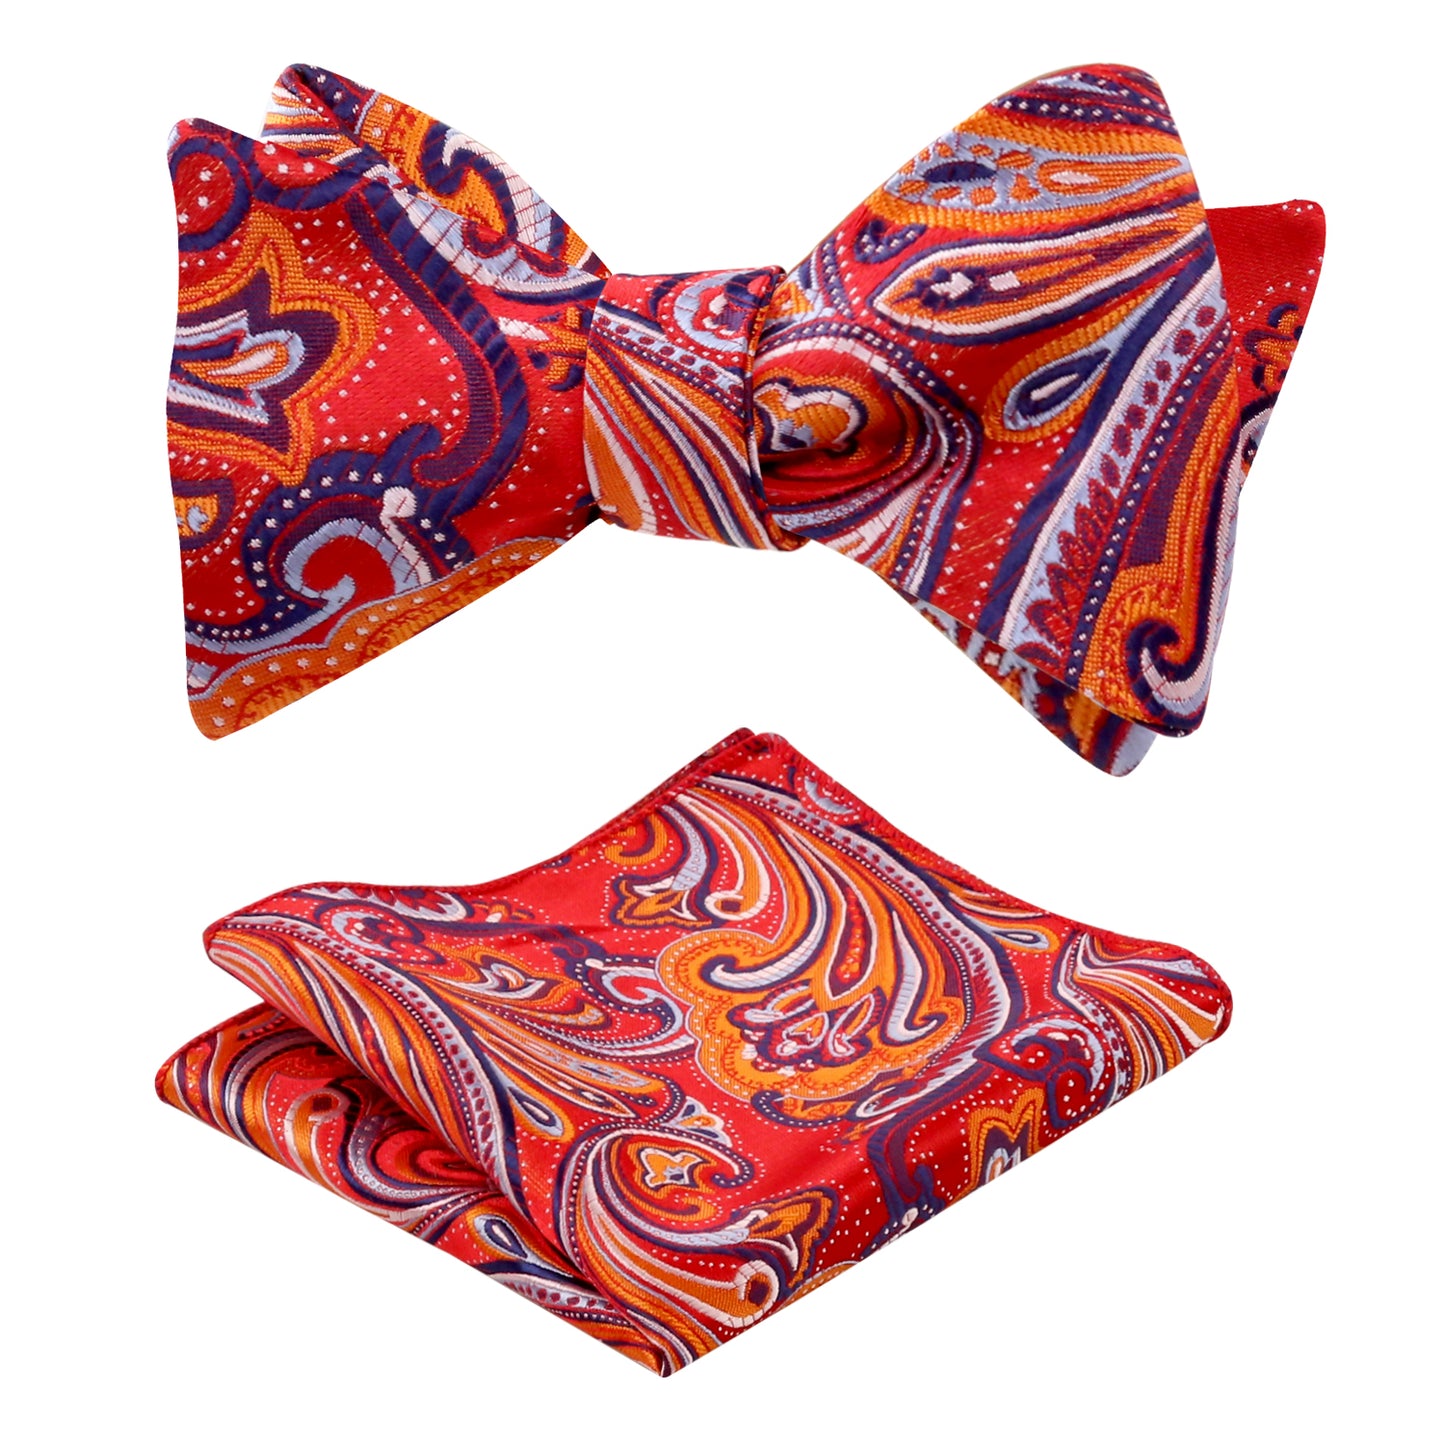 Men's Self-tied Paisley Bow Tie and Pocket Square Set, 167